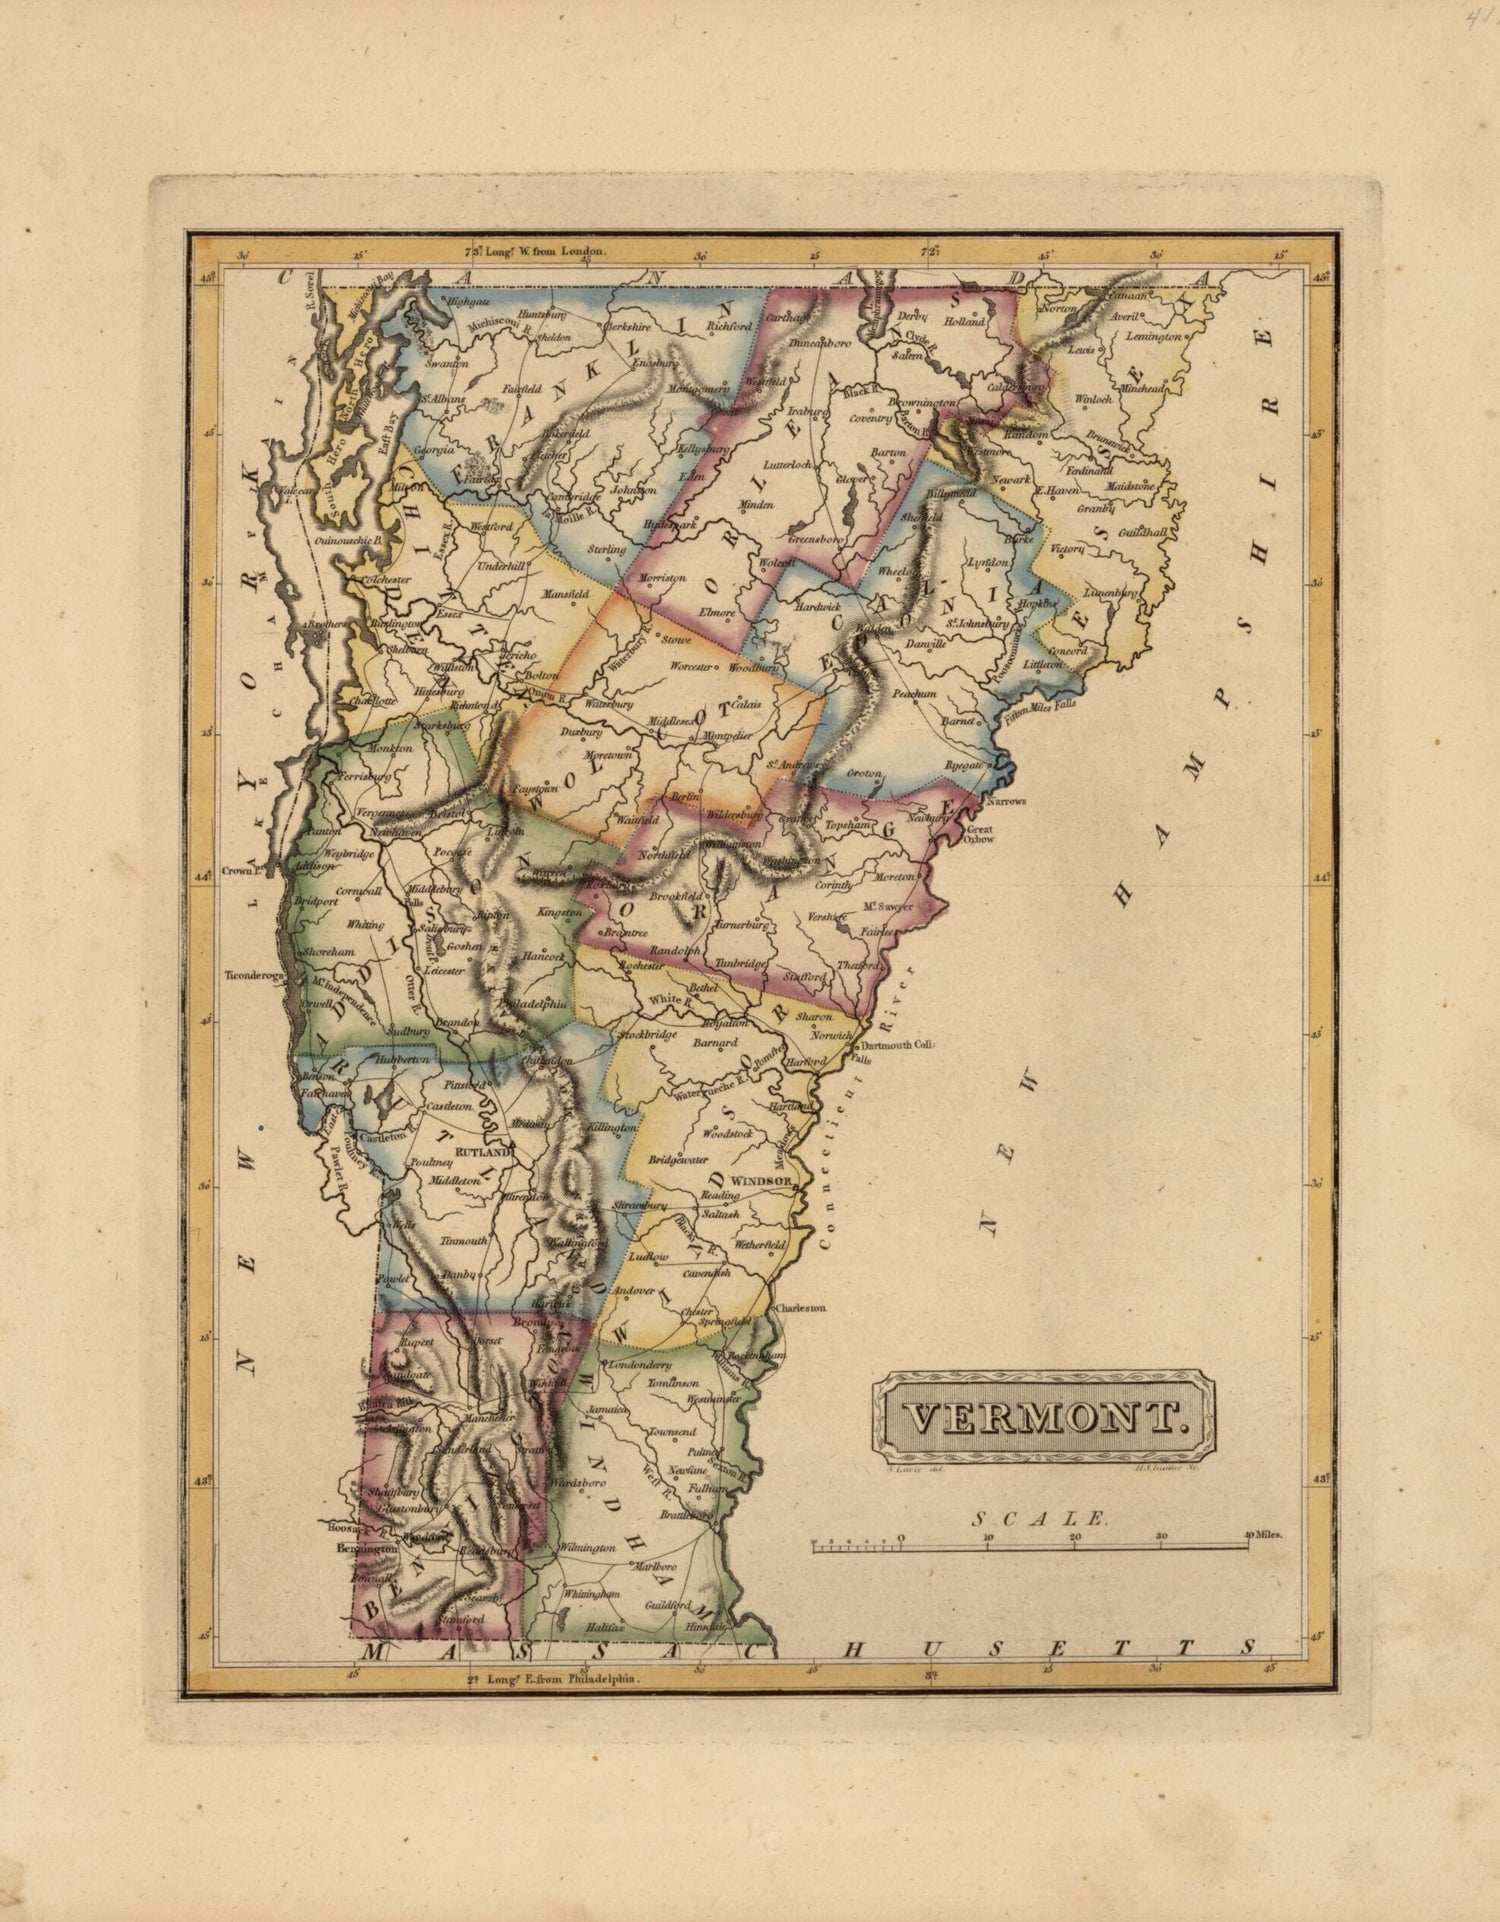 This old map of Vermont from a New and Elegant General Atlas, Containing Maps of Each of the United States. from 1817 was created by Henry Schenck Tanner in 1817